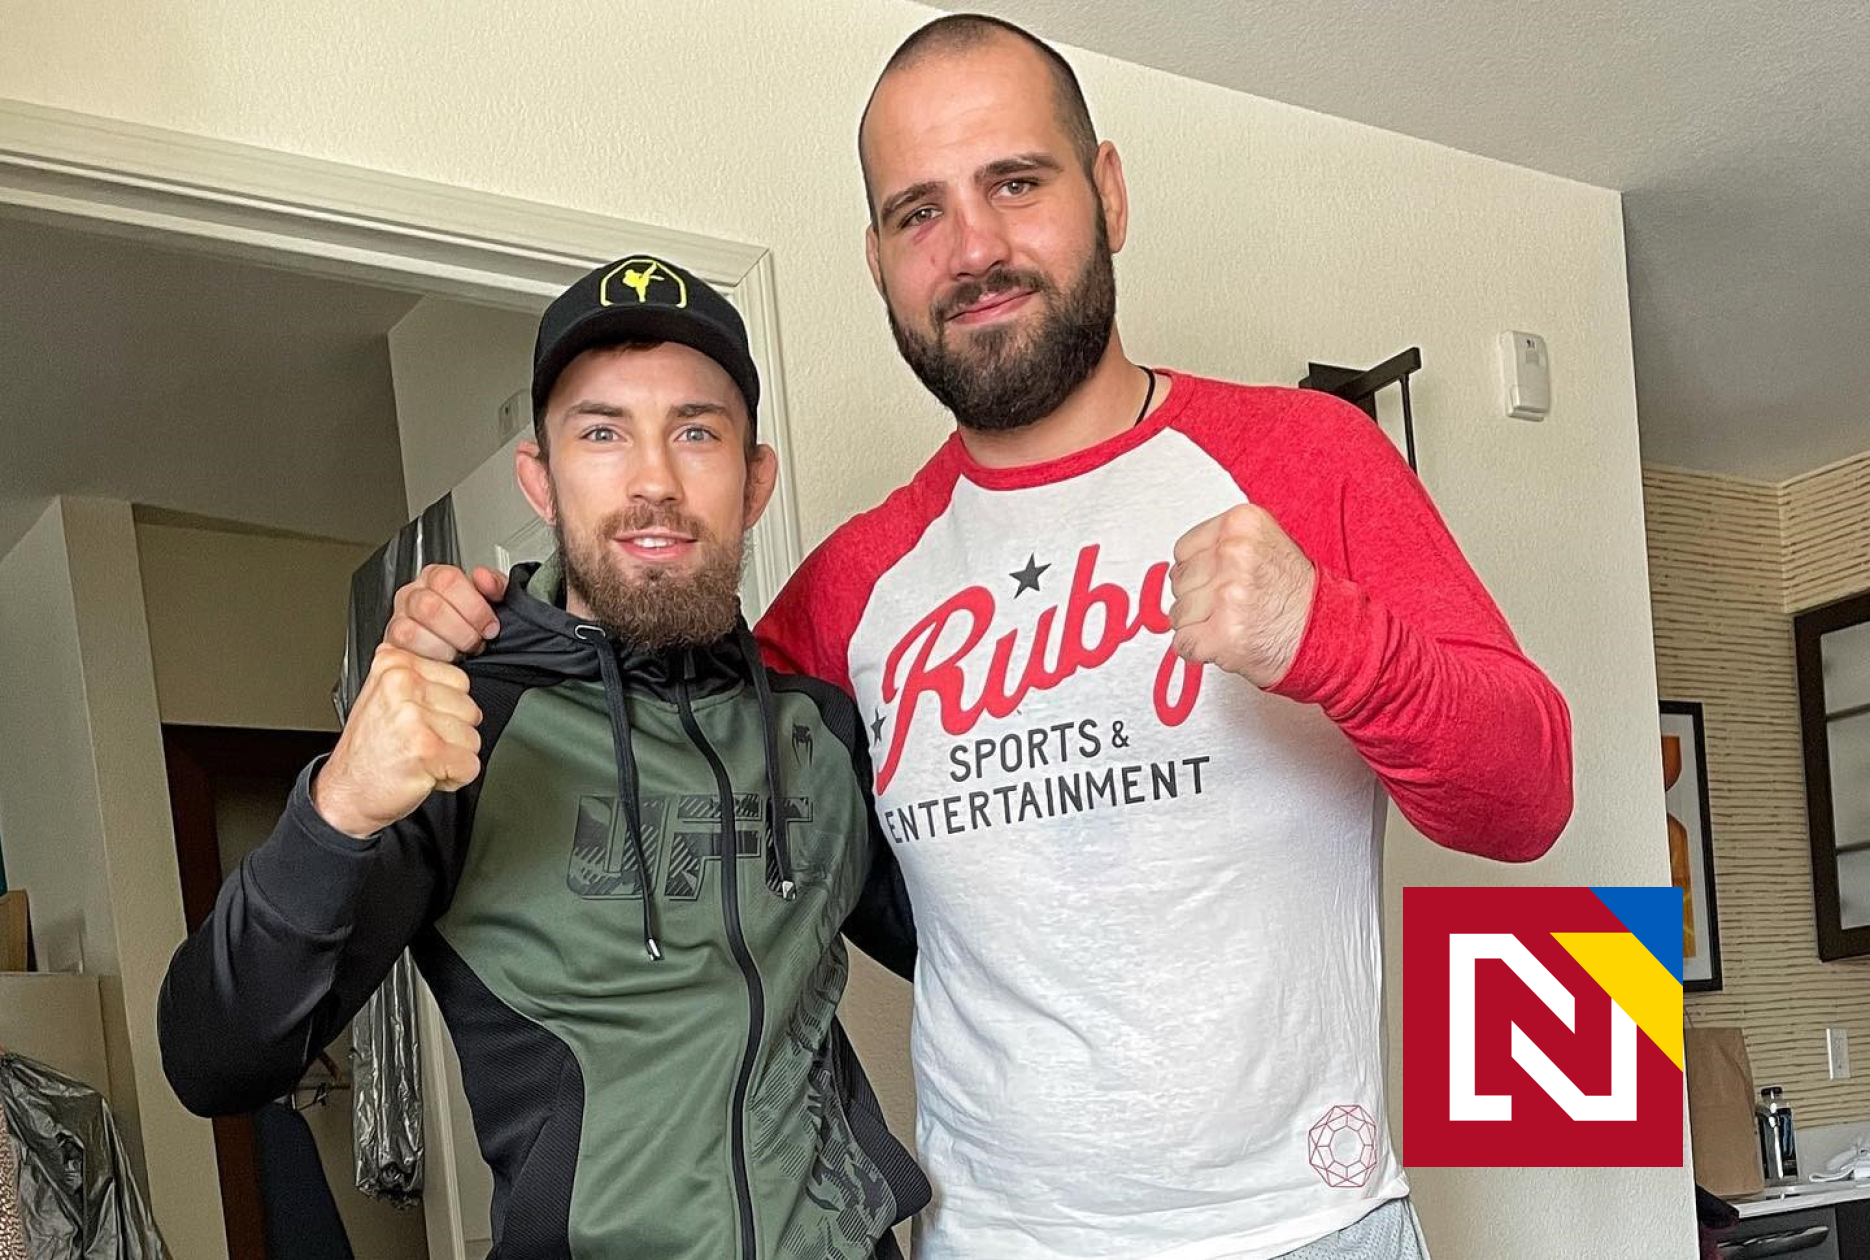 One weighed 160 kilos, the other was a bouncer. Today, they are winning in the UFC and approaching big fights